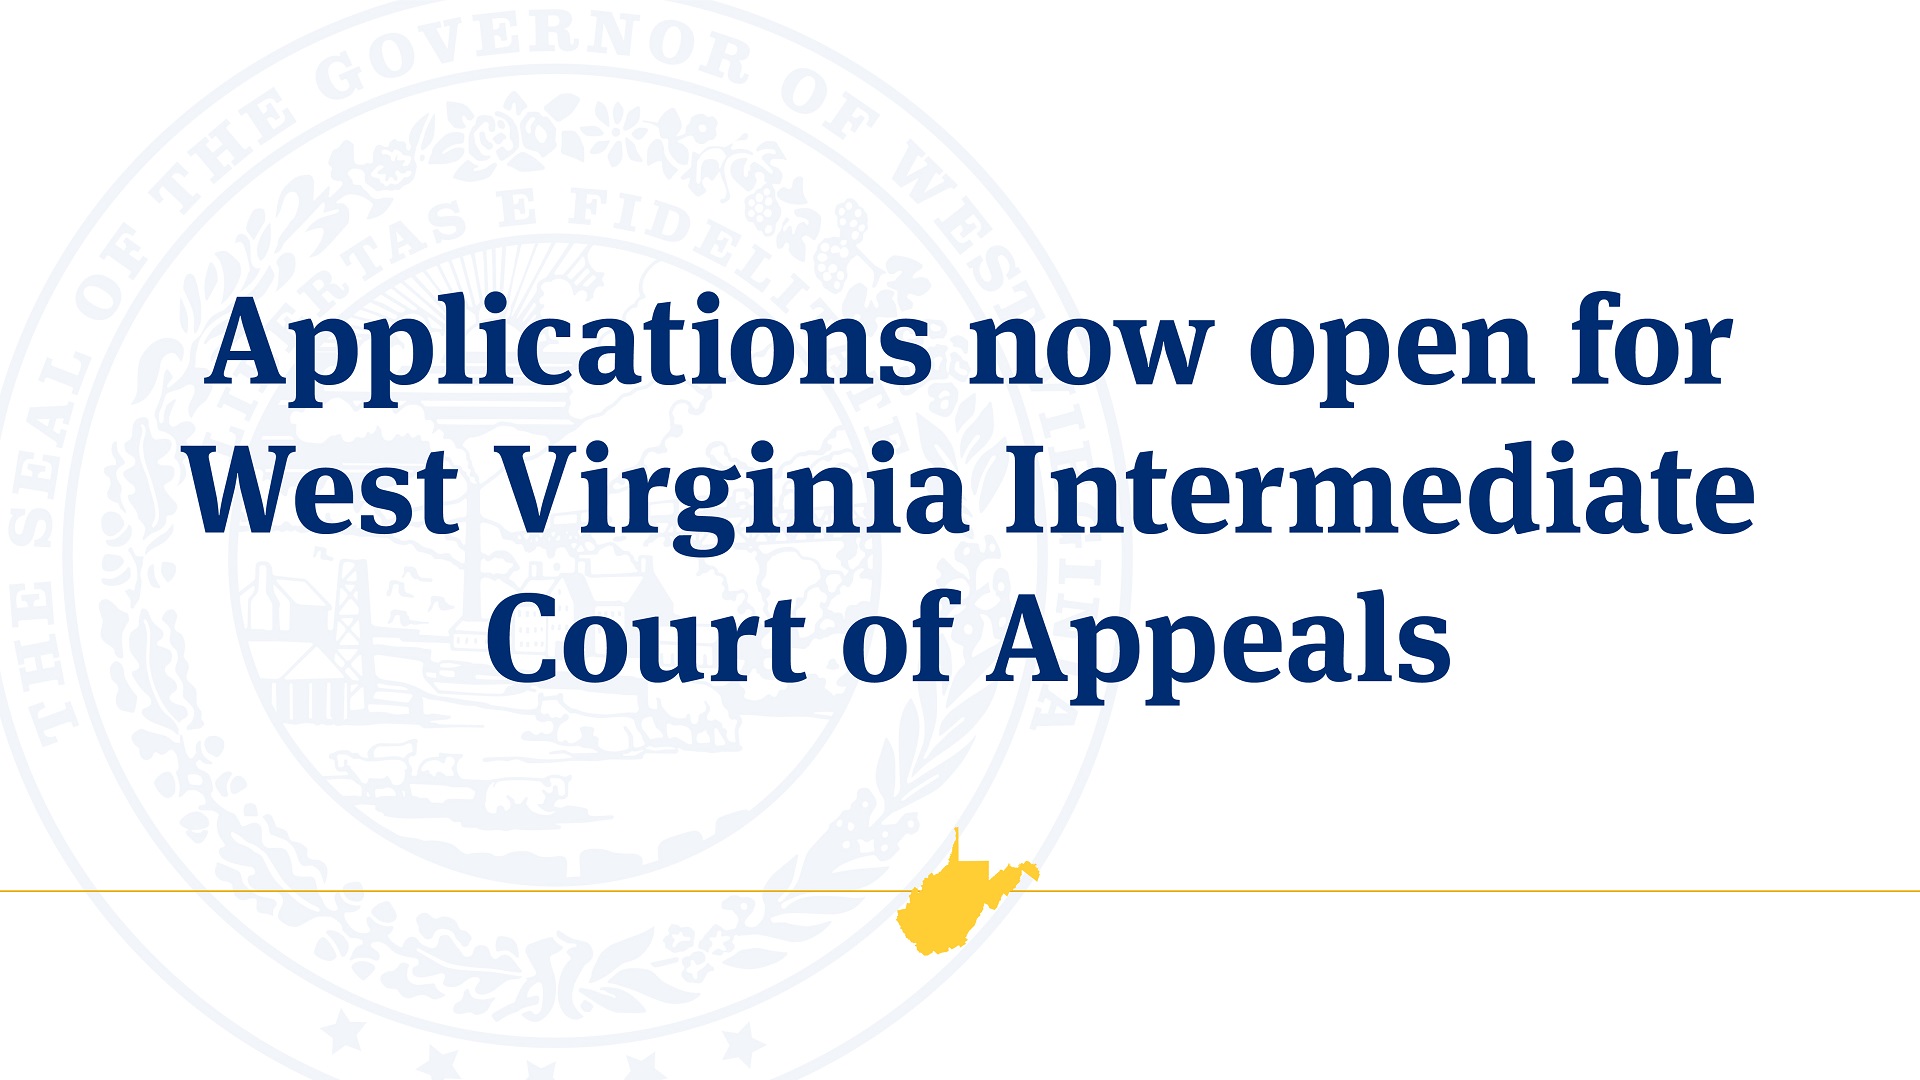 Applications now open for West Virginia Intermediate Court of Appeals